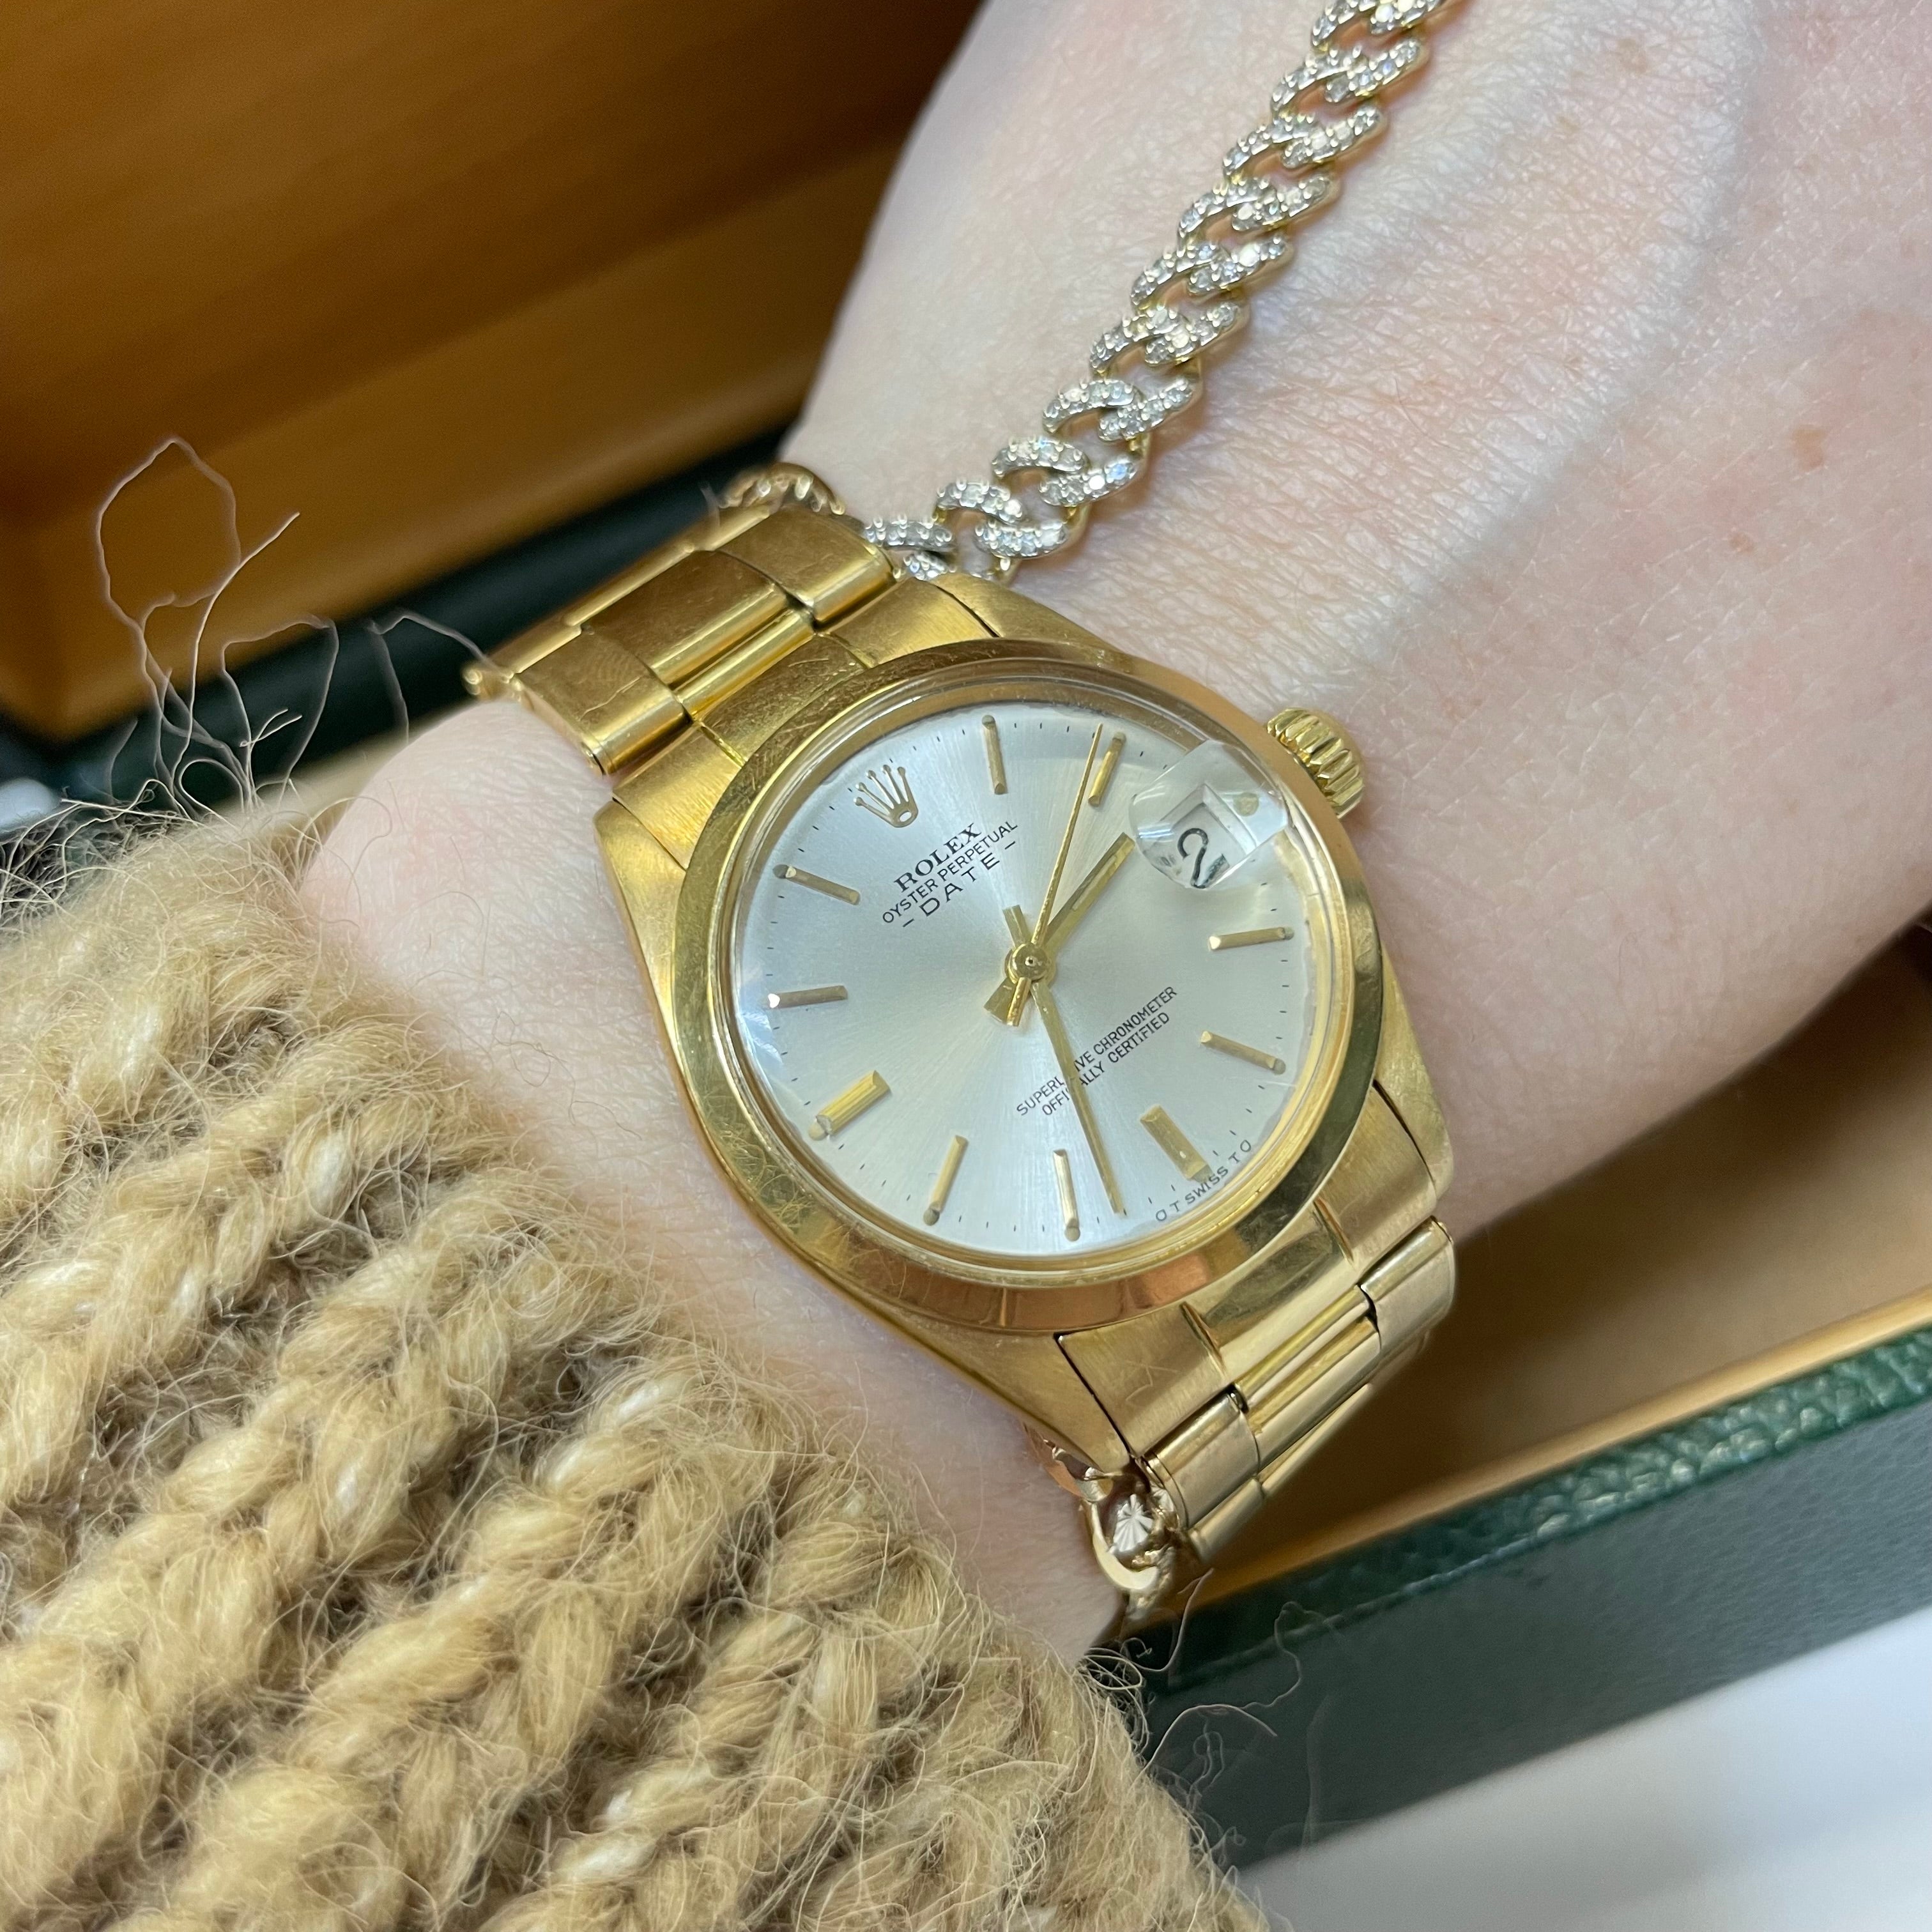 31mm Rolex Solid 18K Yellow Gold with Oyster Strap